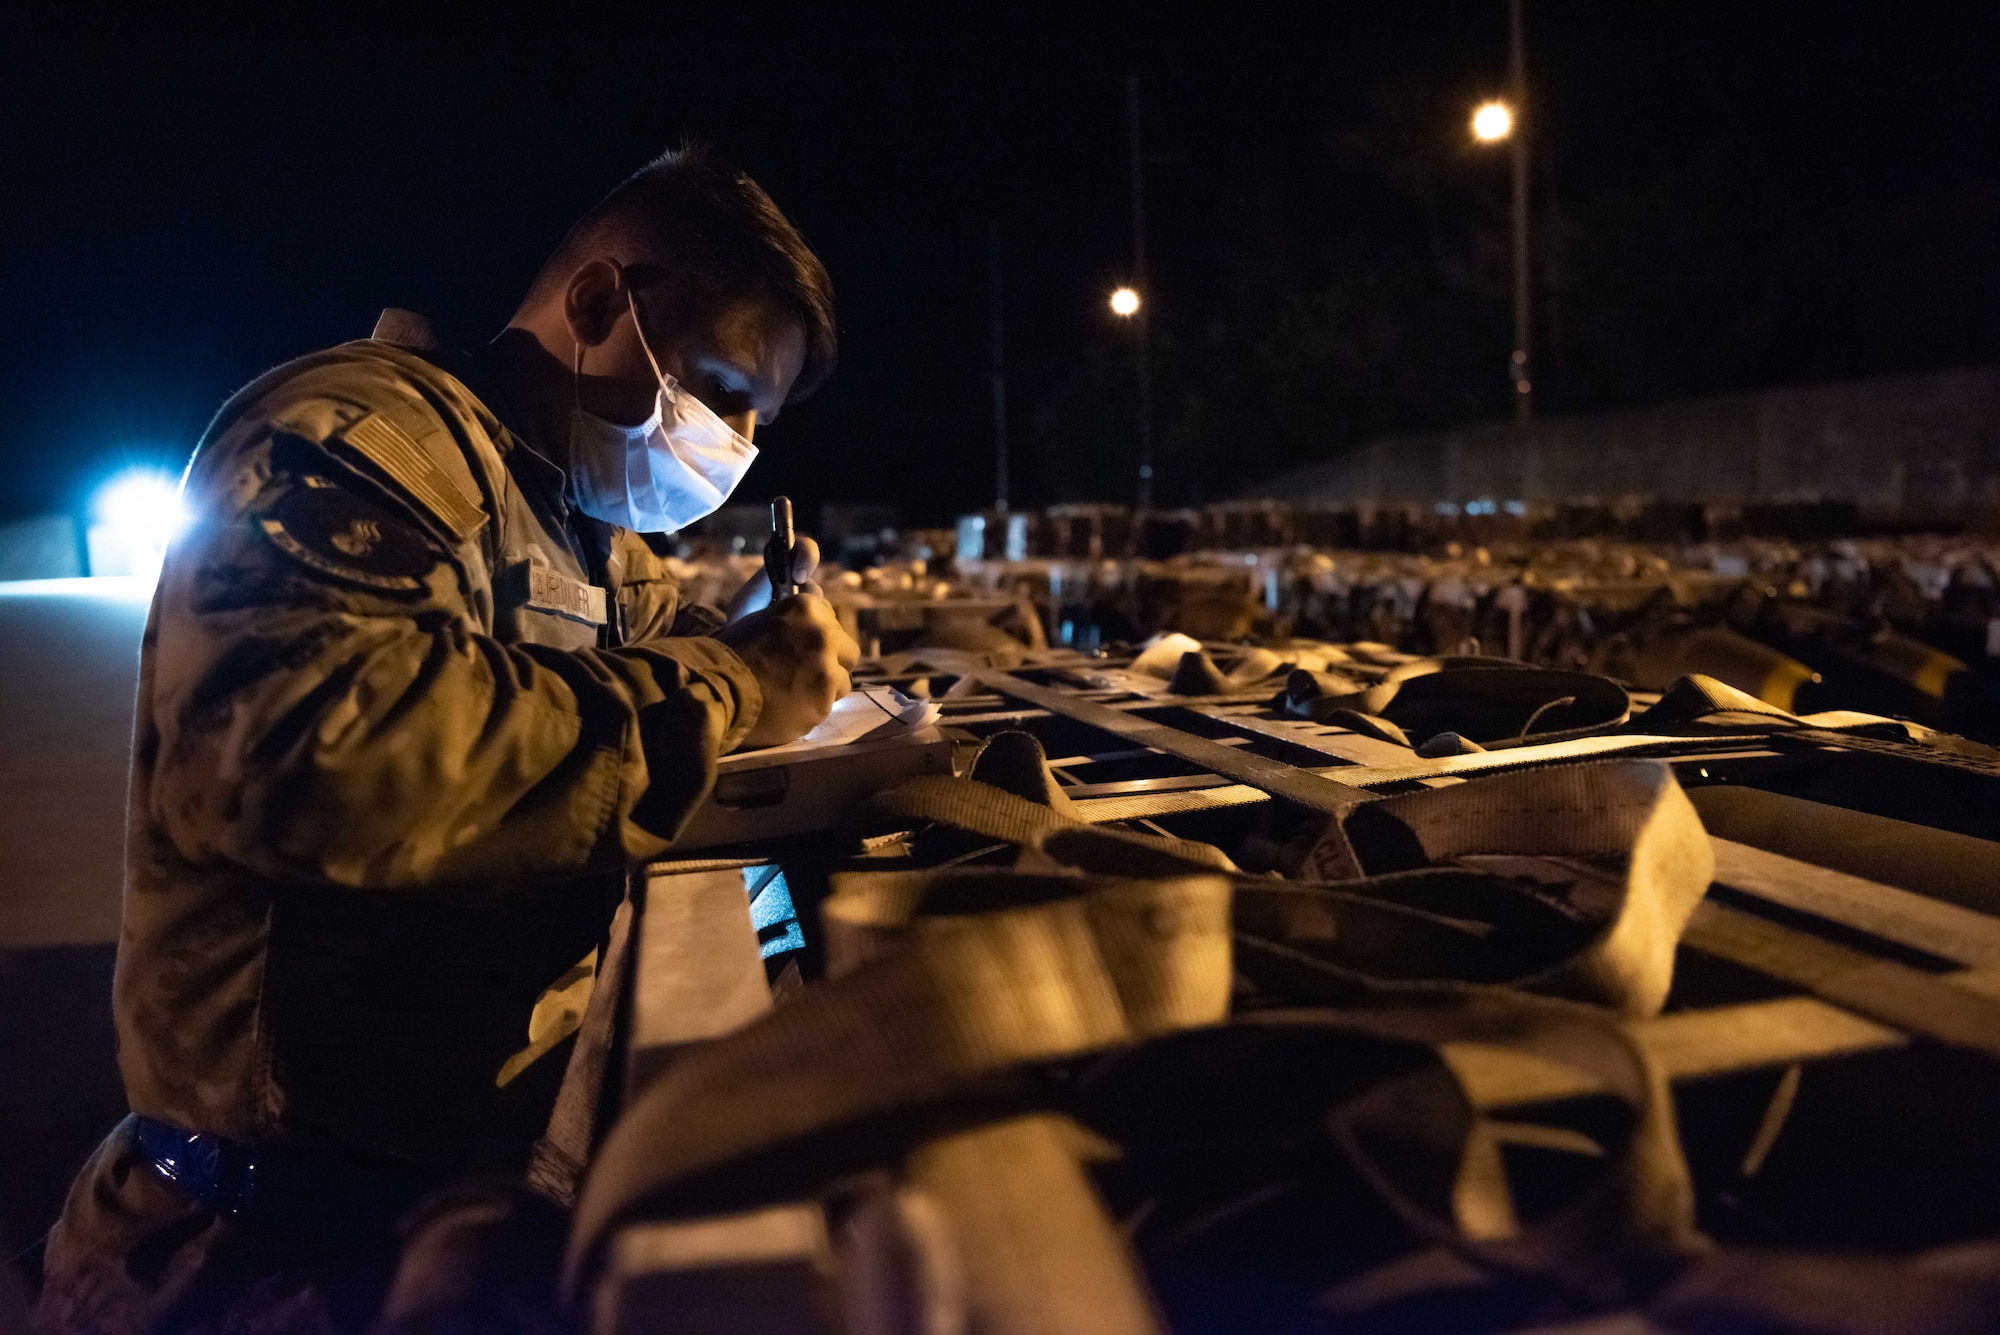 Airmen work to move munitions at night.